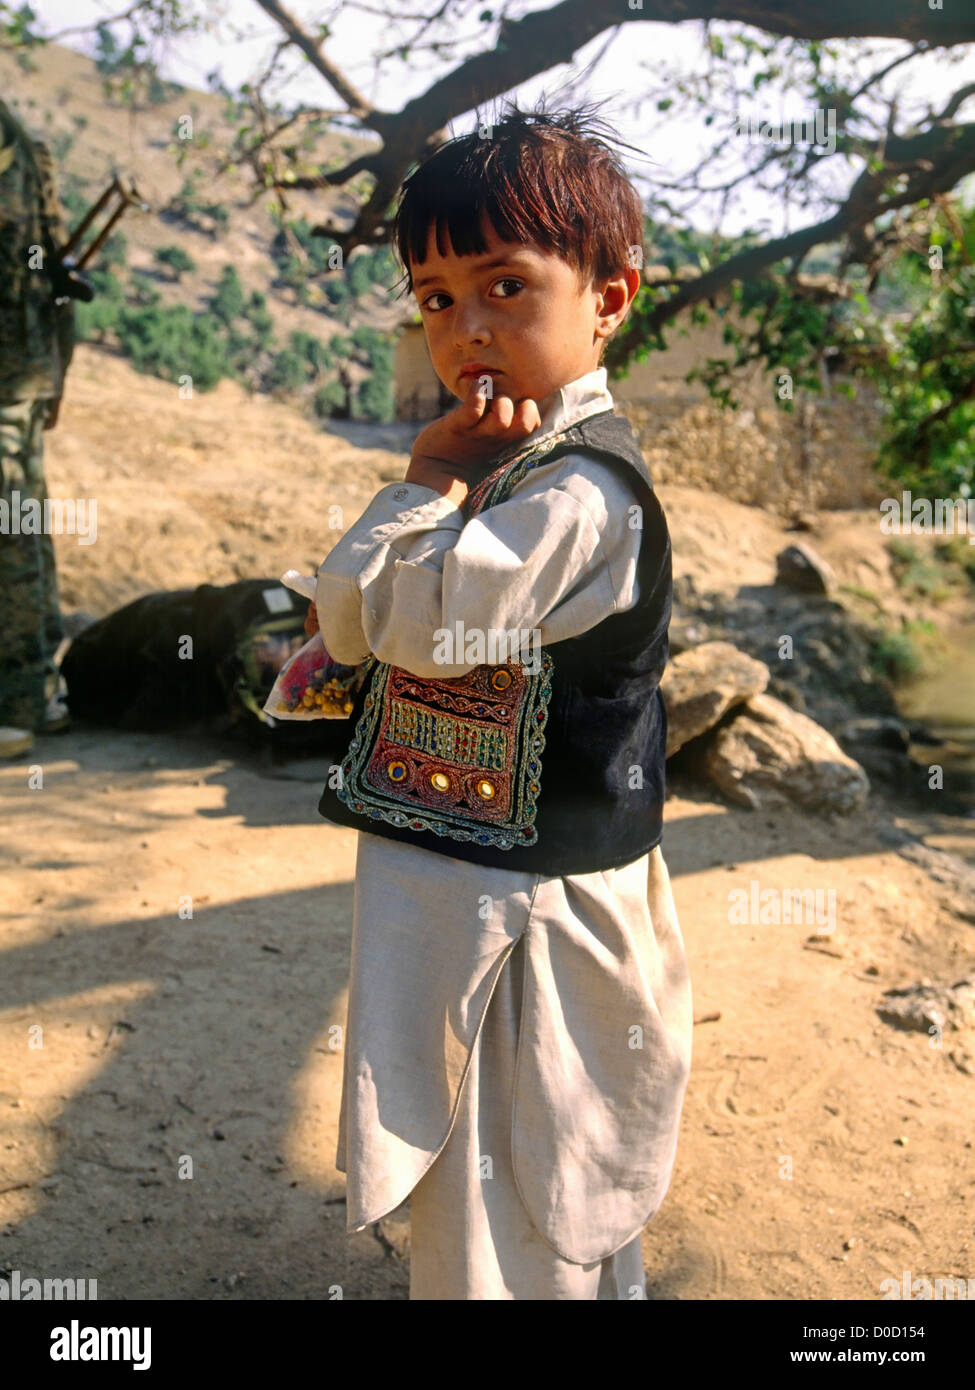 A Young Afghan Boy in a Remote Village Stock Photo